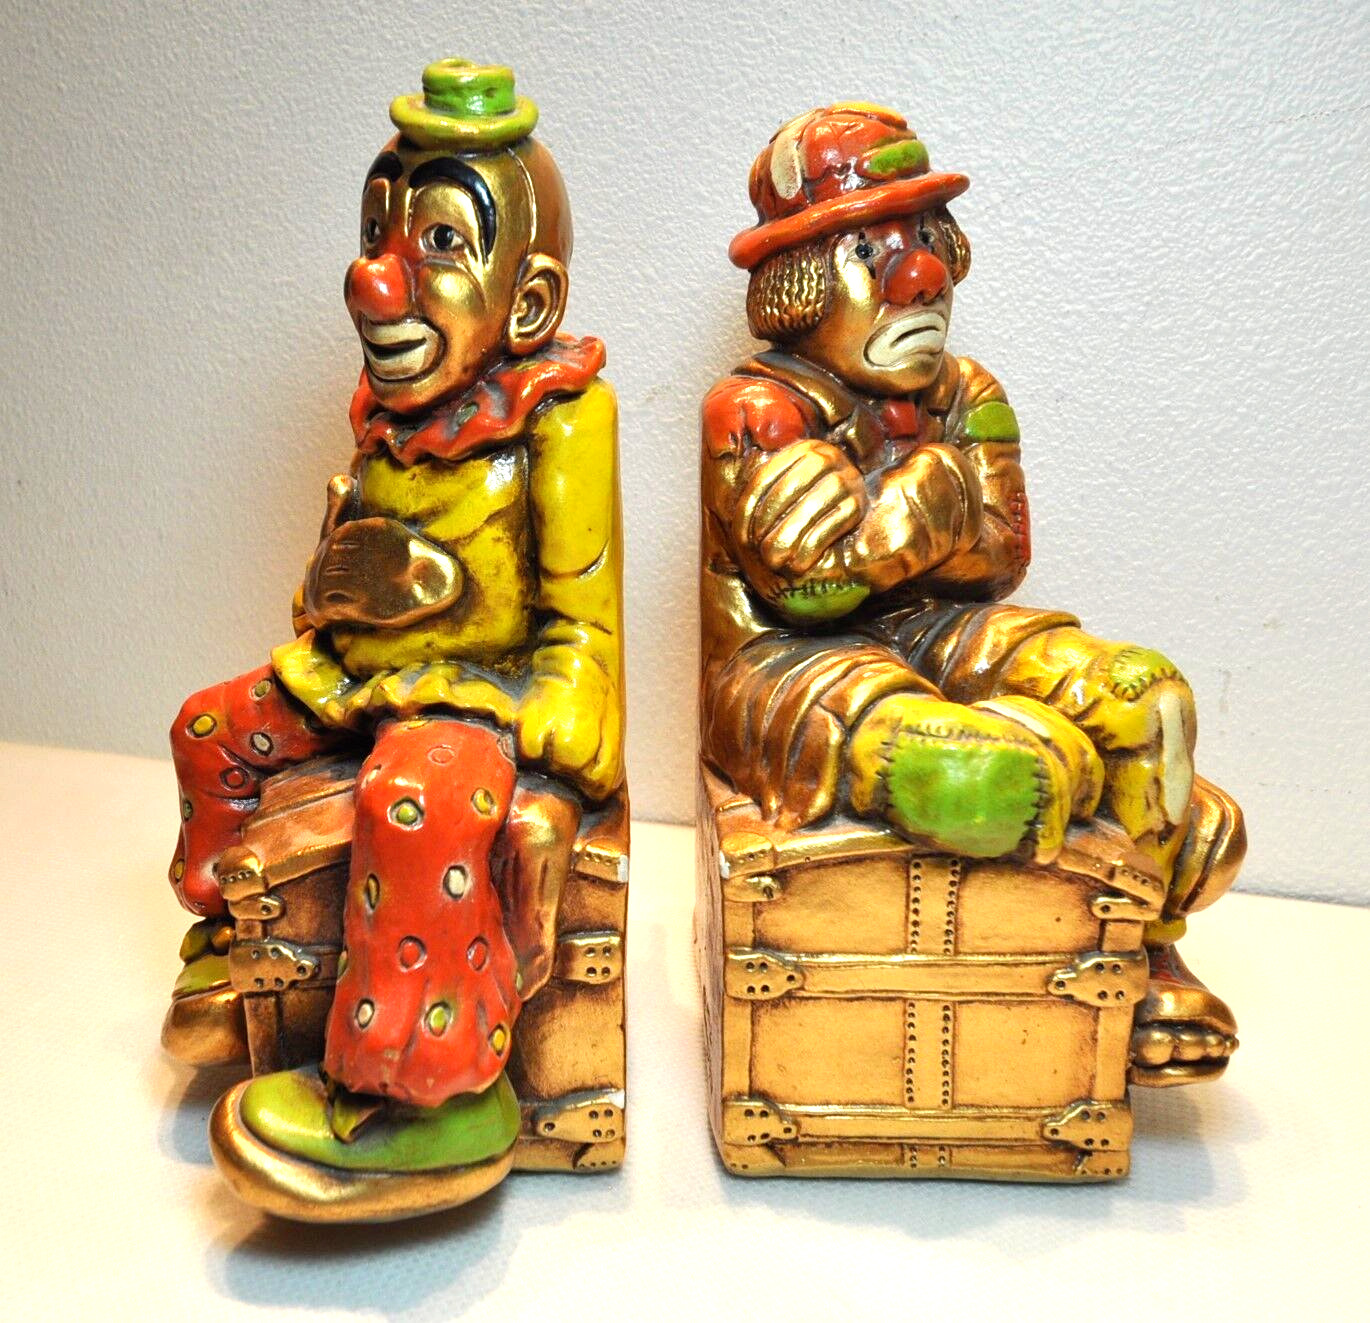 Clown Chalkware Bookends 1972 Progressive Art Products Vintage 10.5 Inches Tall